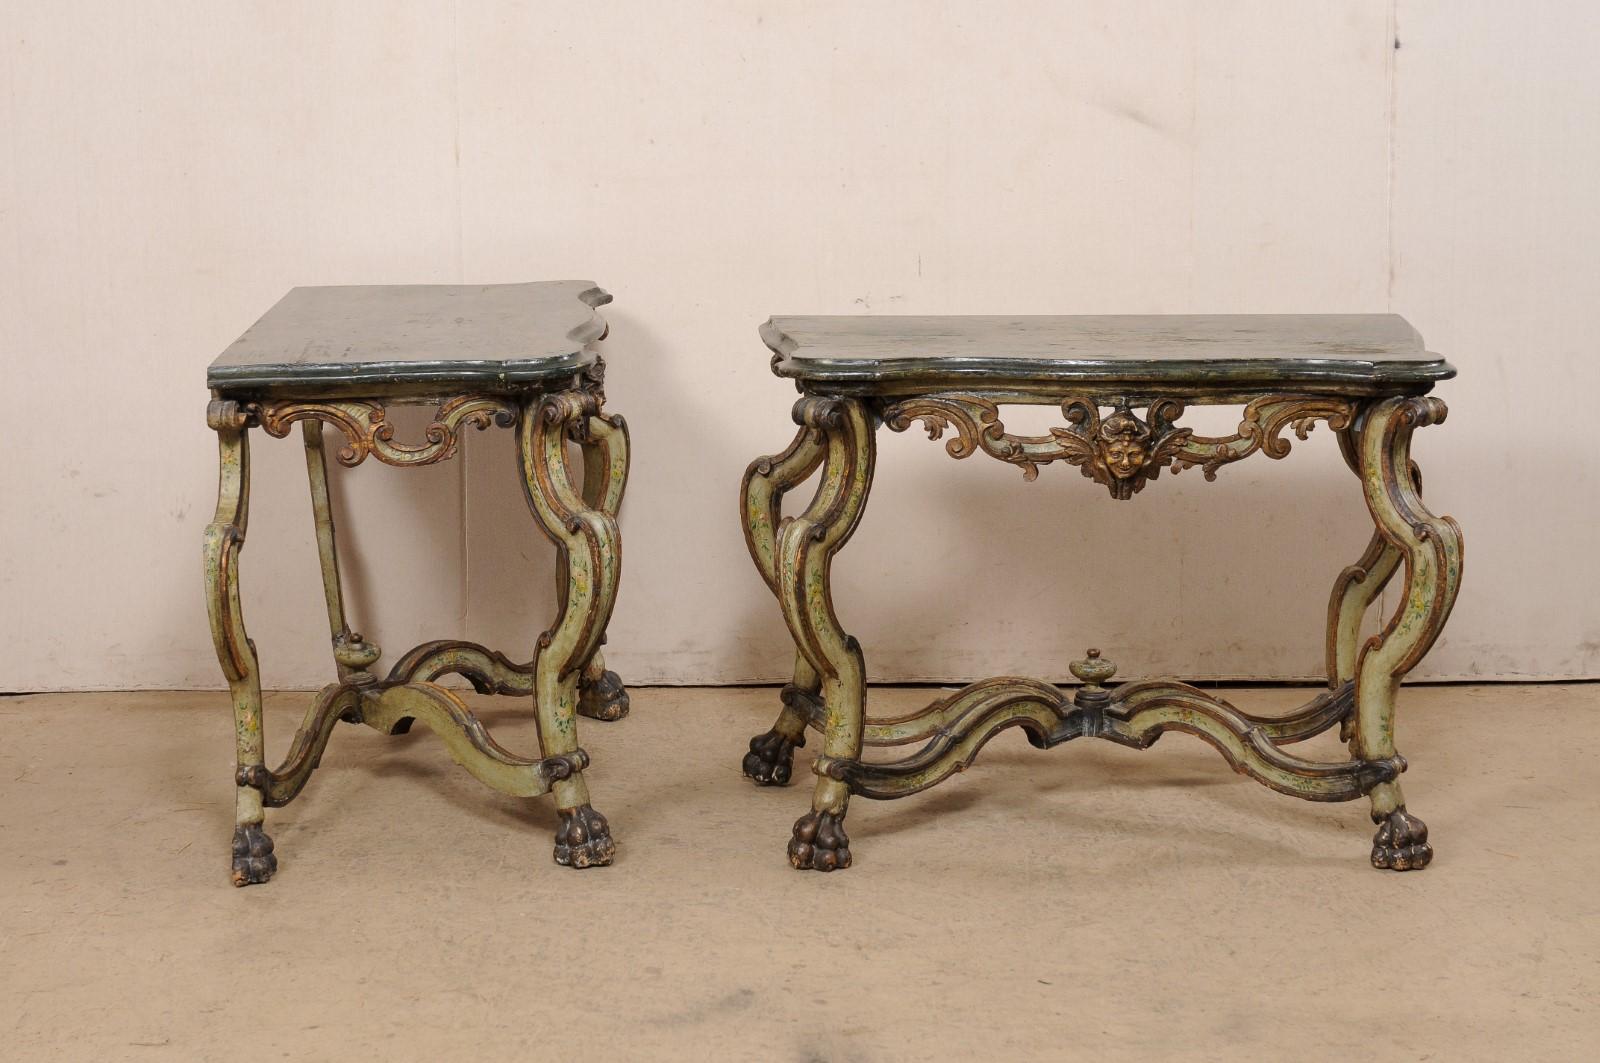 Exquisite Pair of 18th C. Italian Venetian Carved & Painted Wood Console Tables For Sale 3